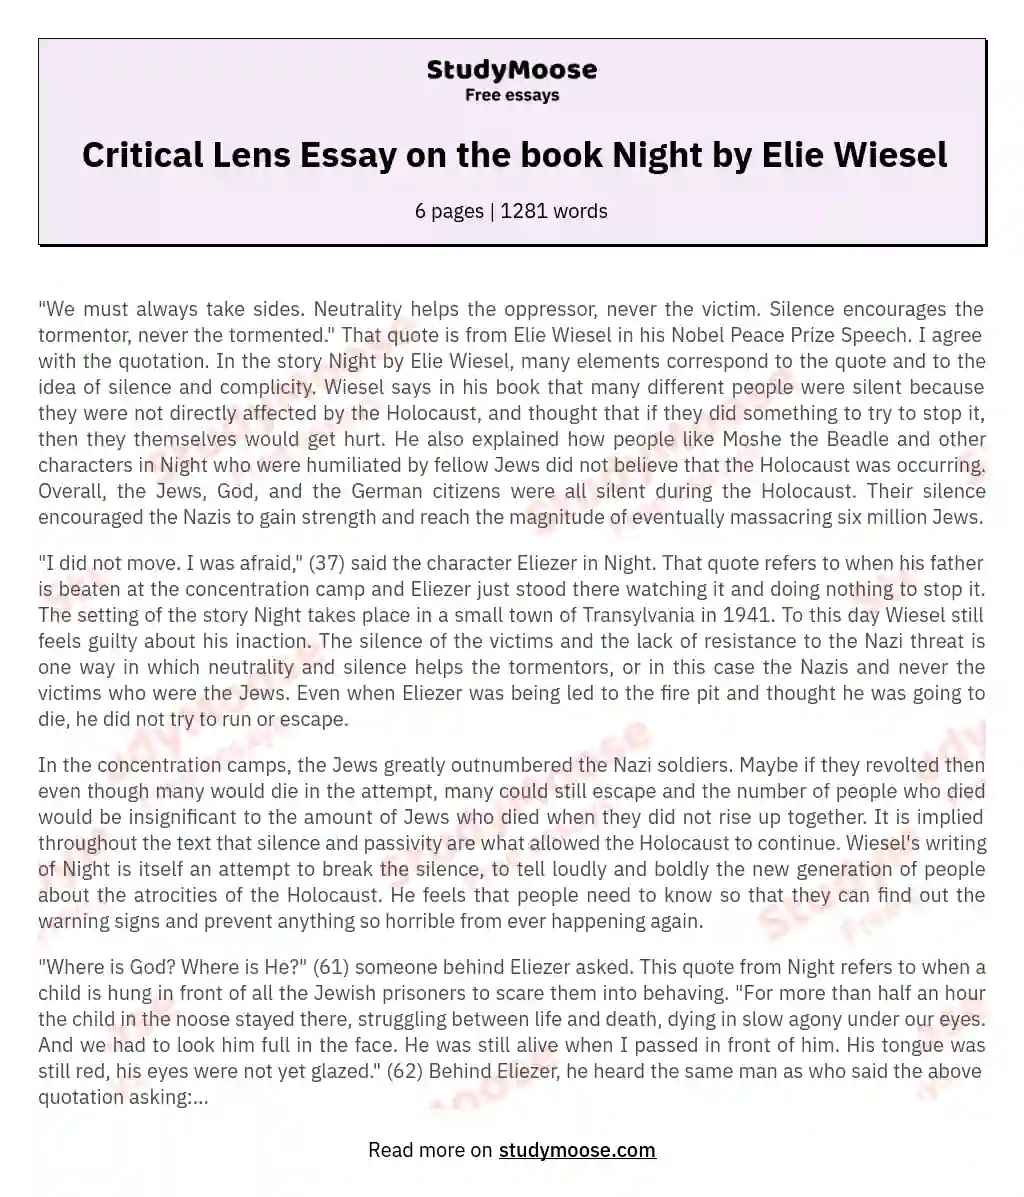 Critical Lens Essay on the book Night by Elie Wiesel